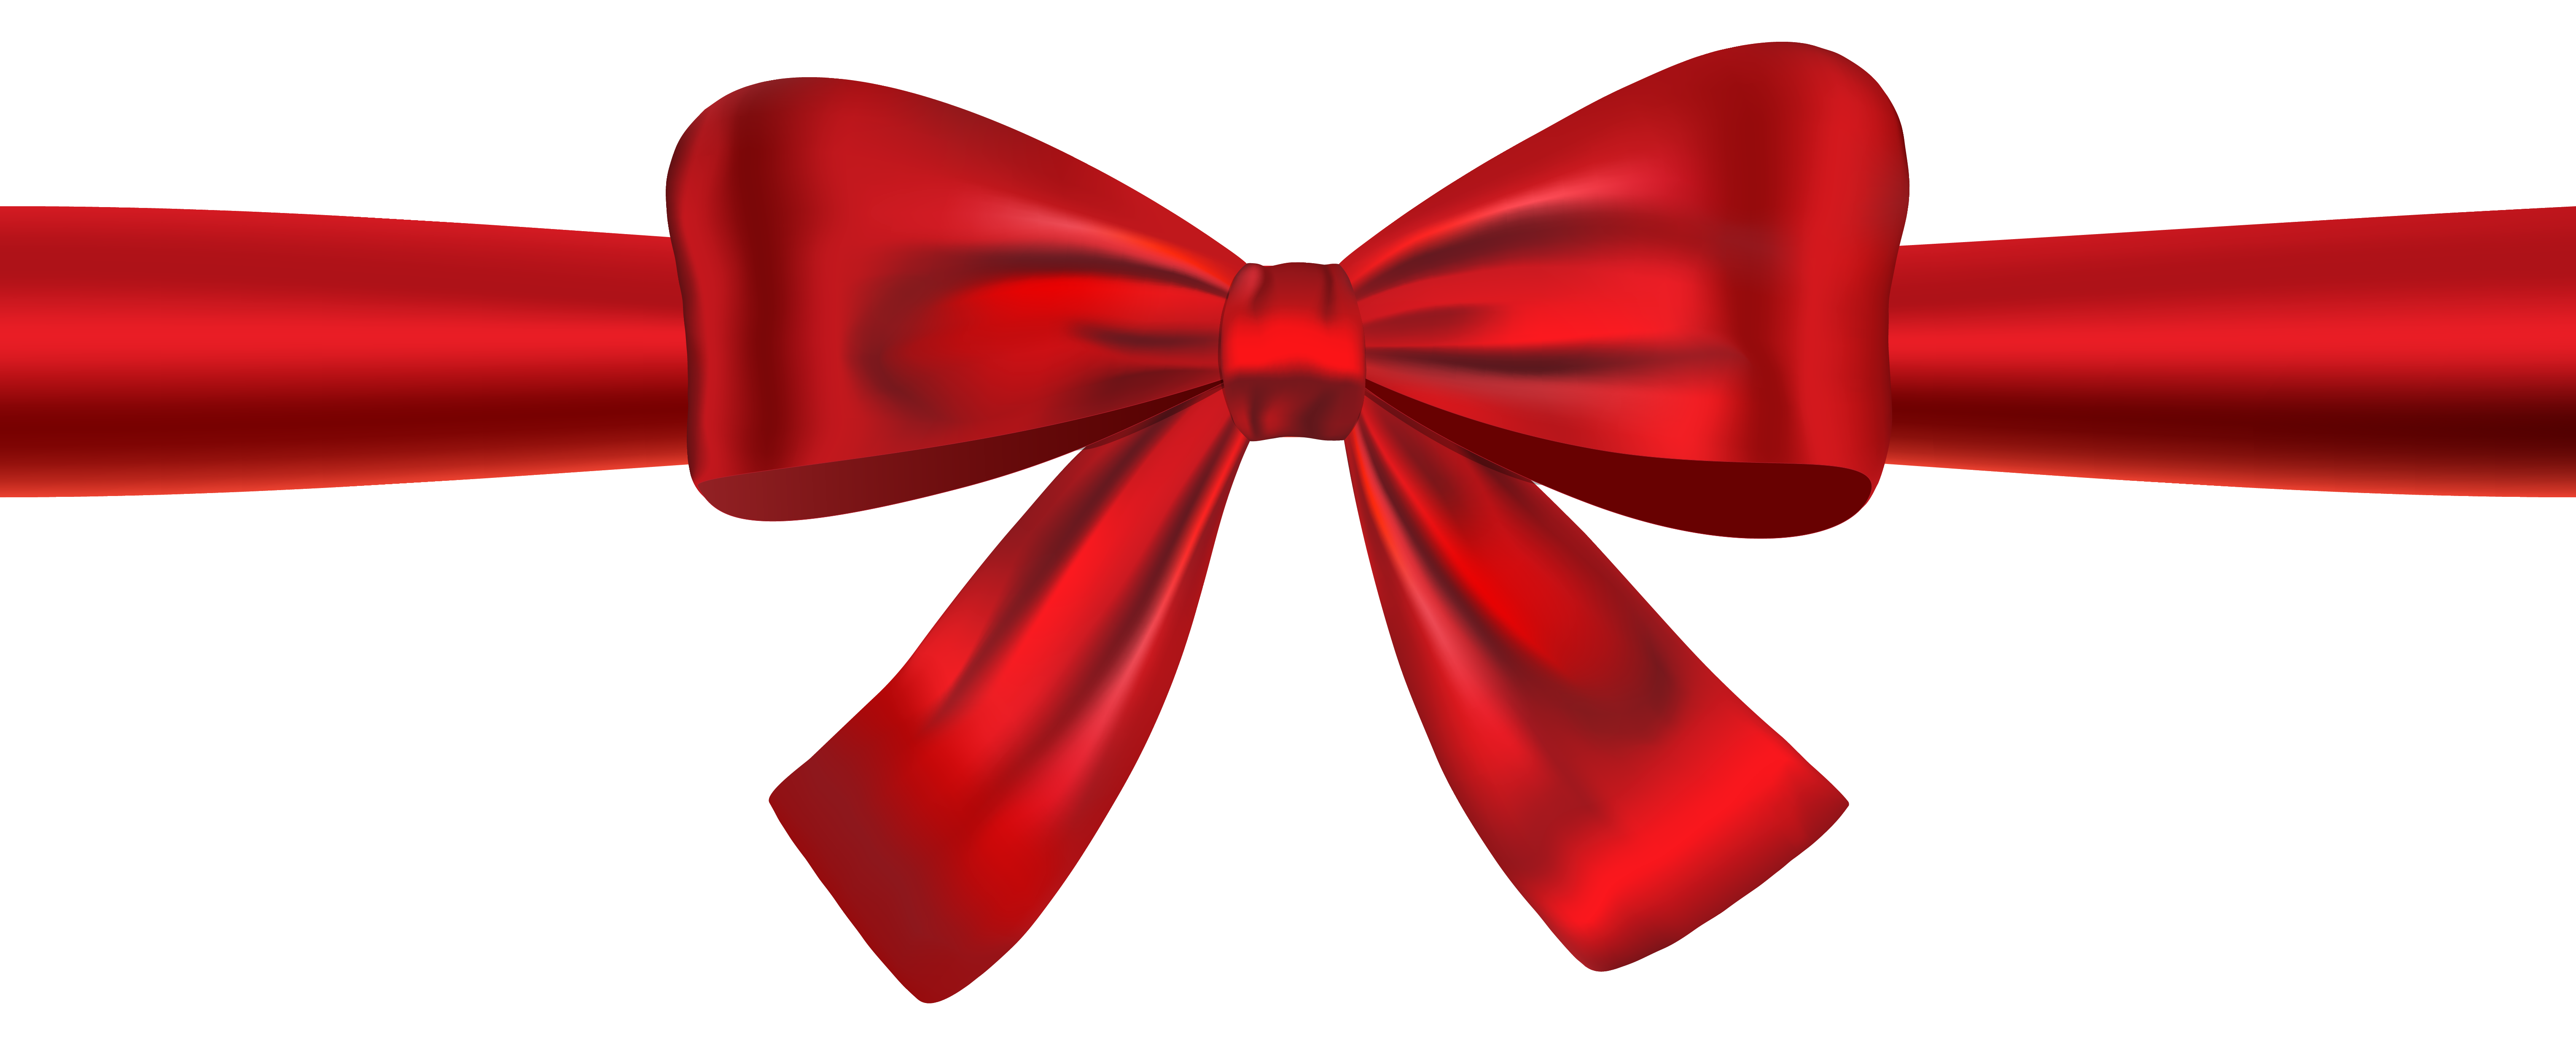 free clipart red christmas bow - photo #45